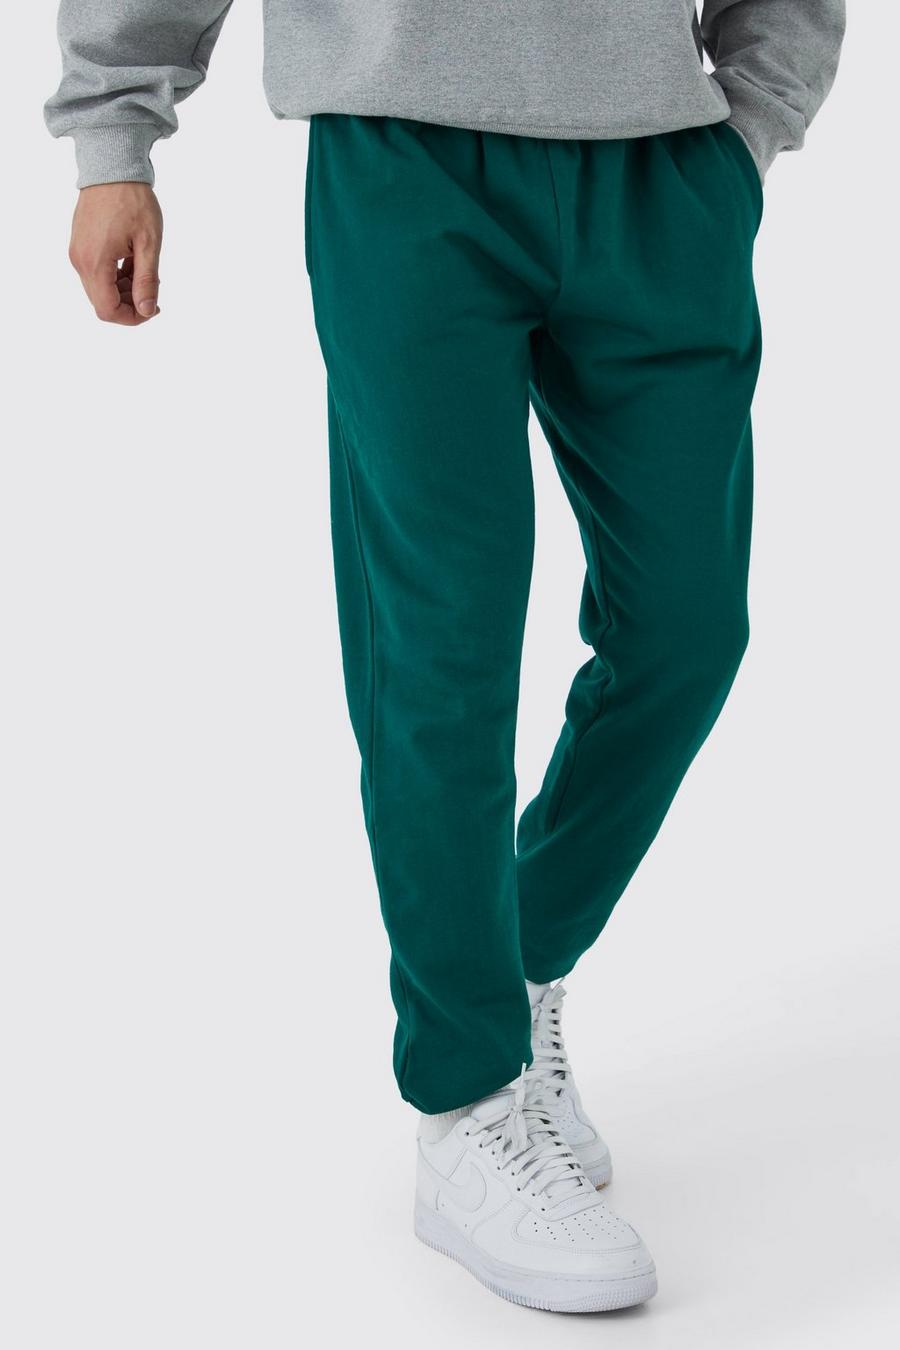 Forest gerde Tall Core Fit Basic Jogger